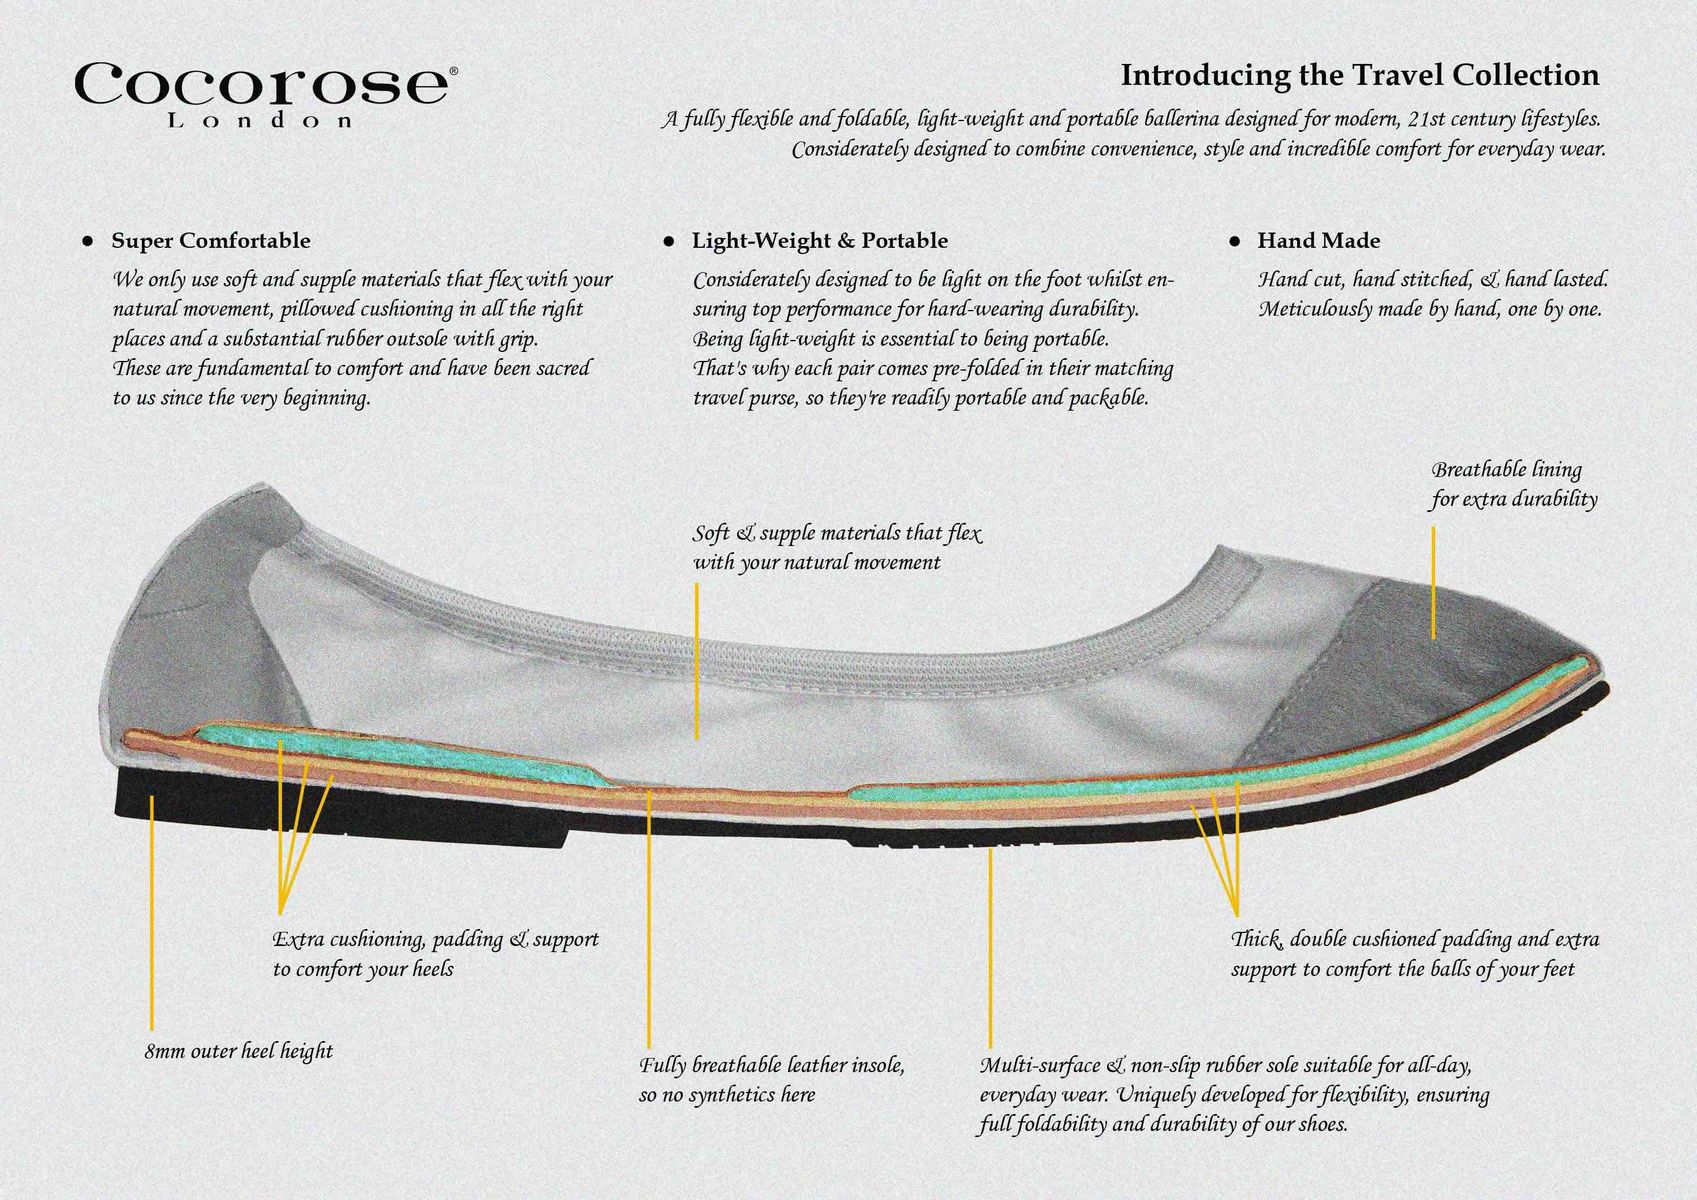 Cross-section of a Cocorose London 'Travel Collection' shoe